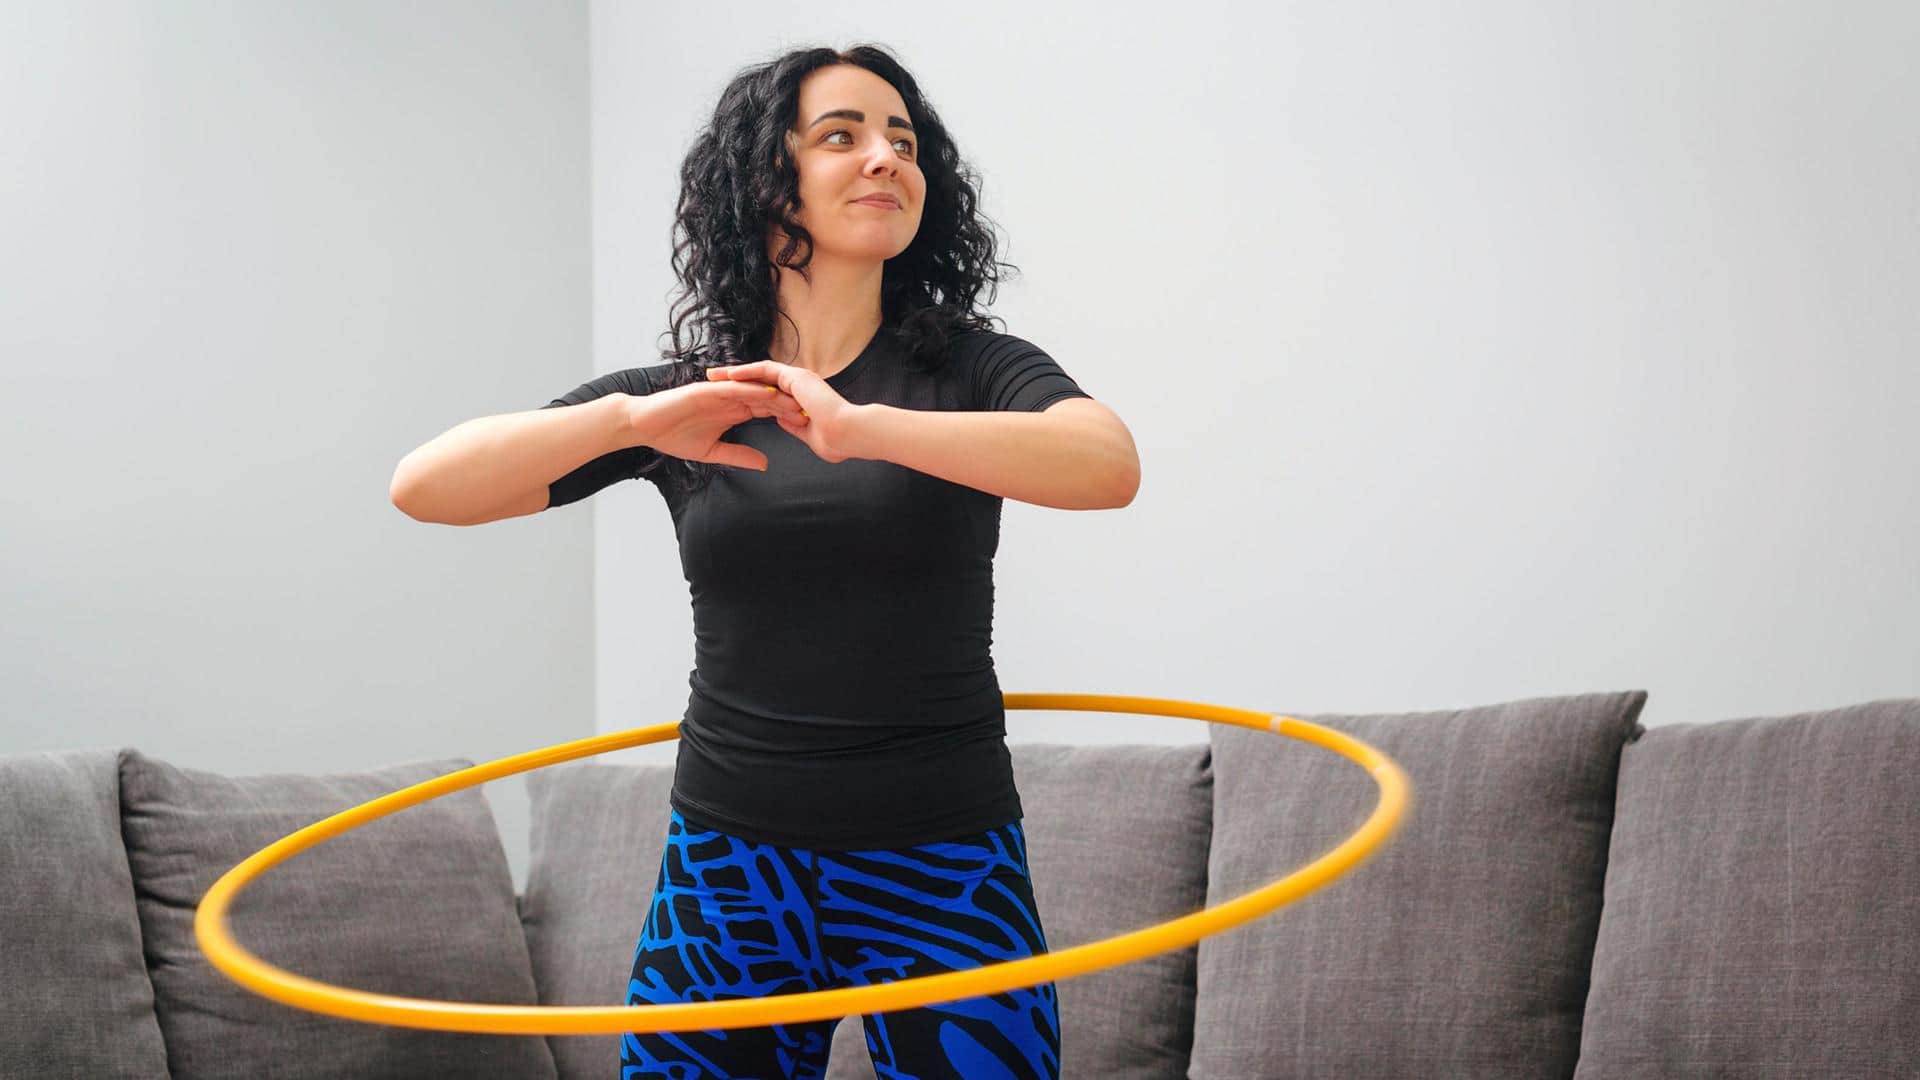 Hula Hoop: A fun workout that offers multiple health benefits